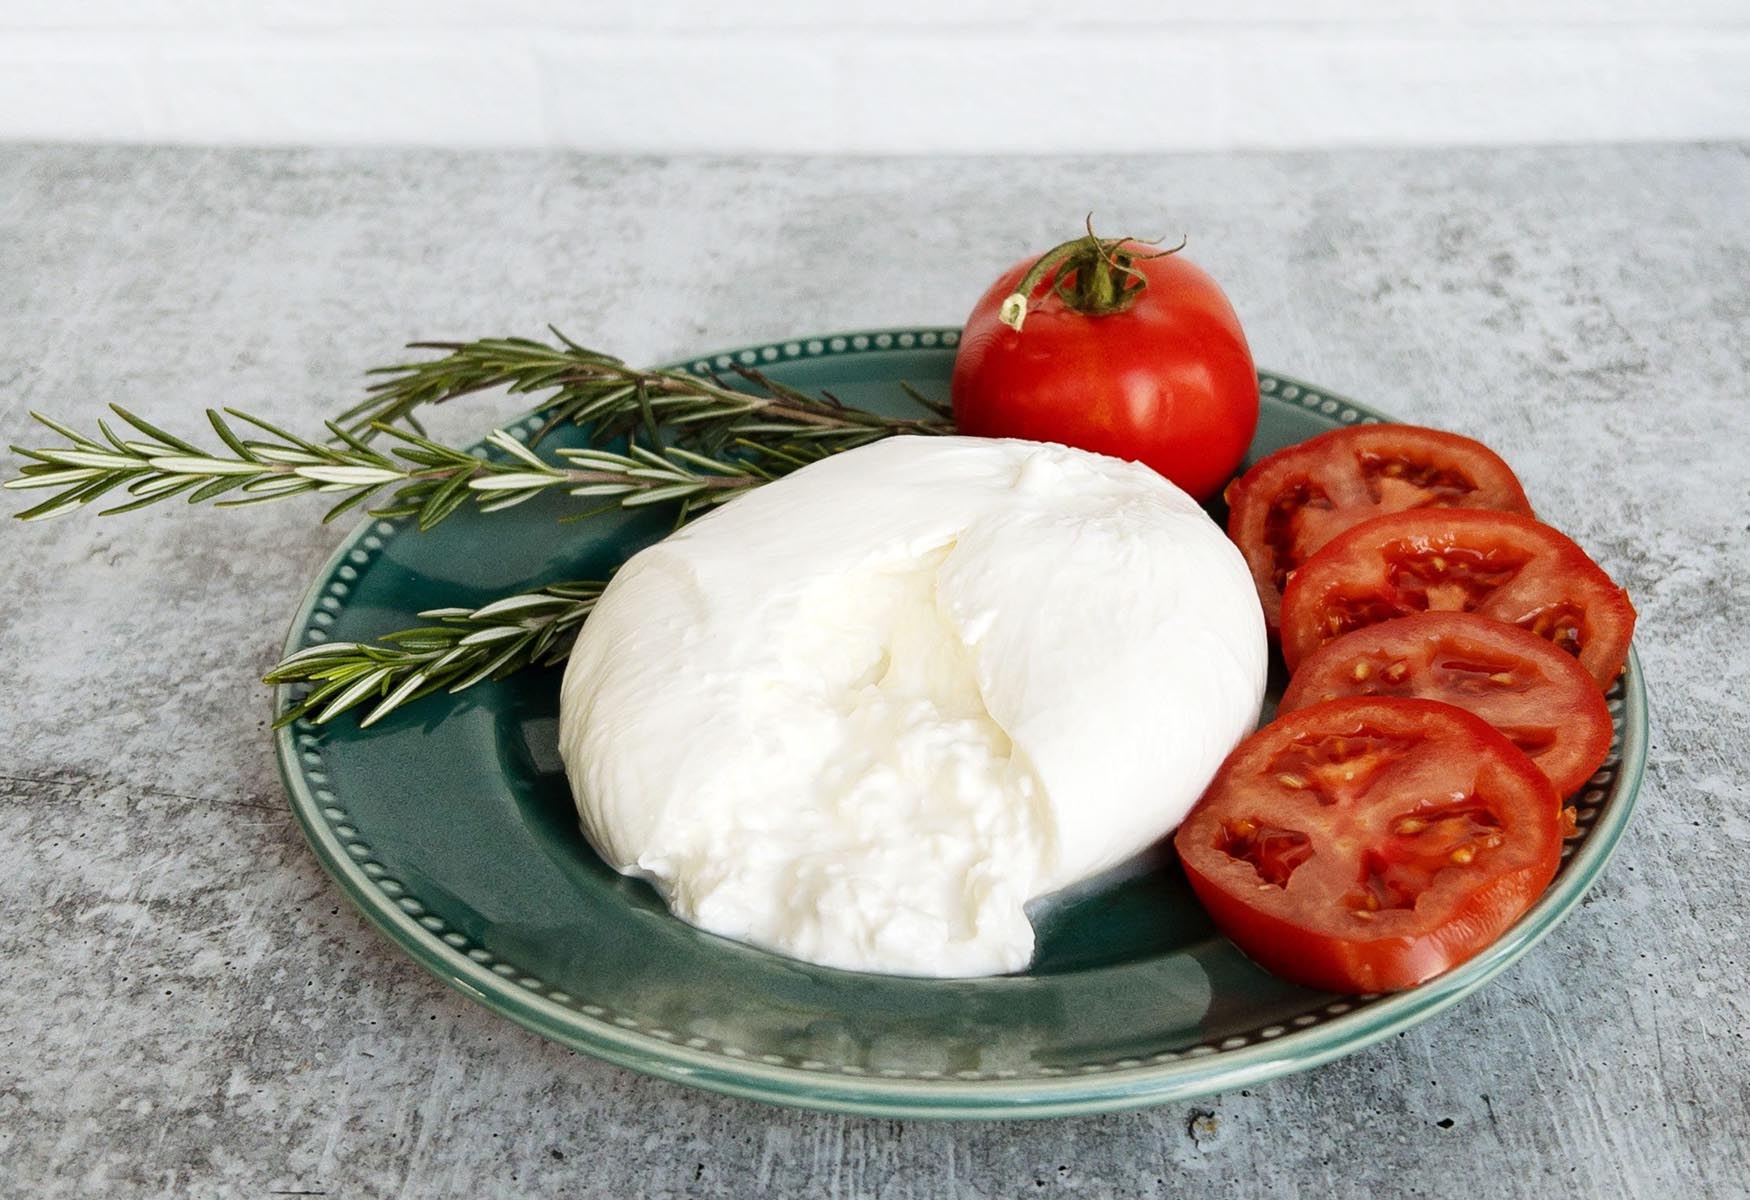 19-burrata-cheese-nutrition-facts